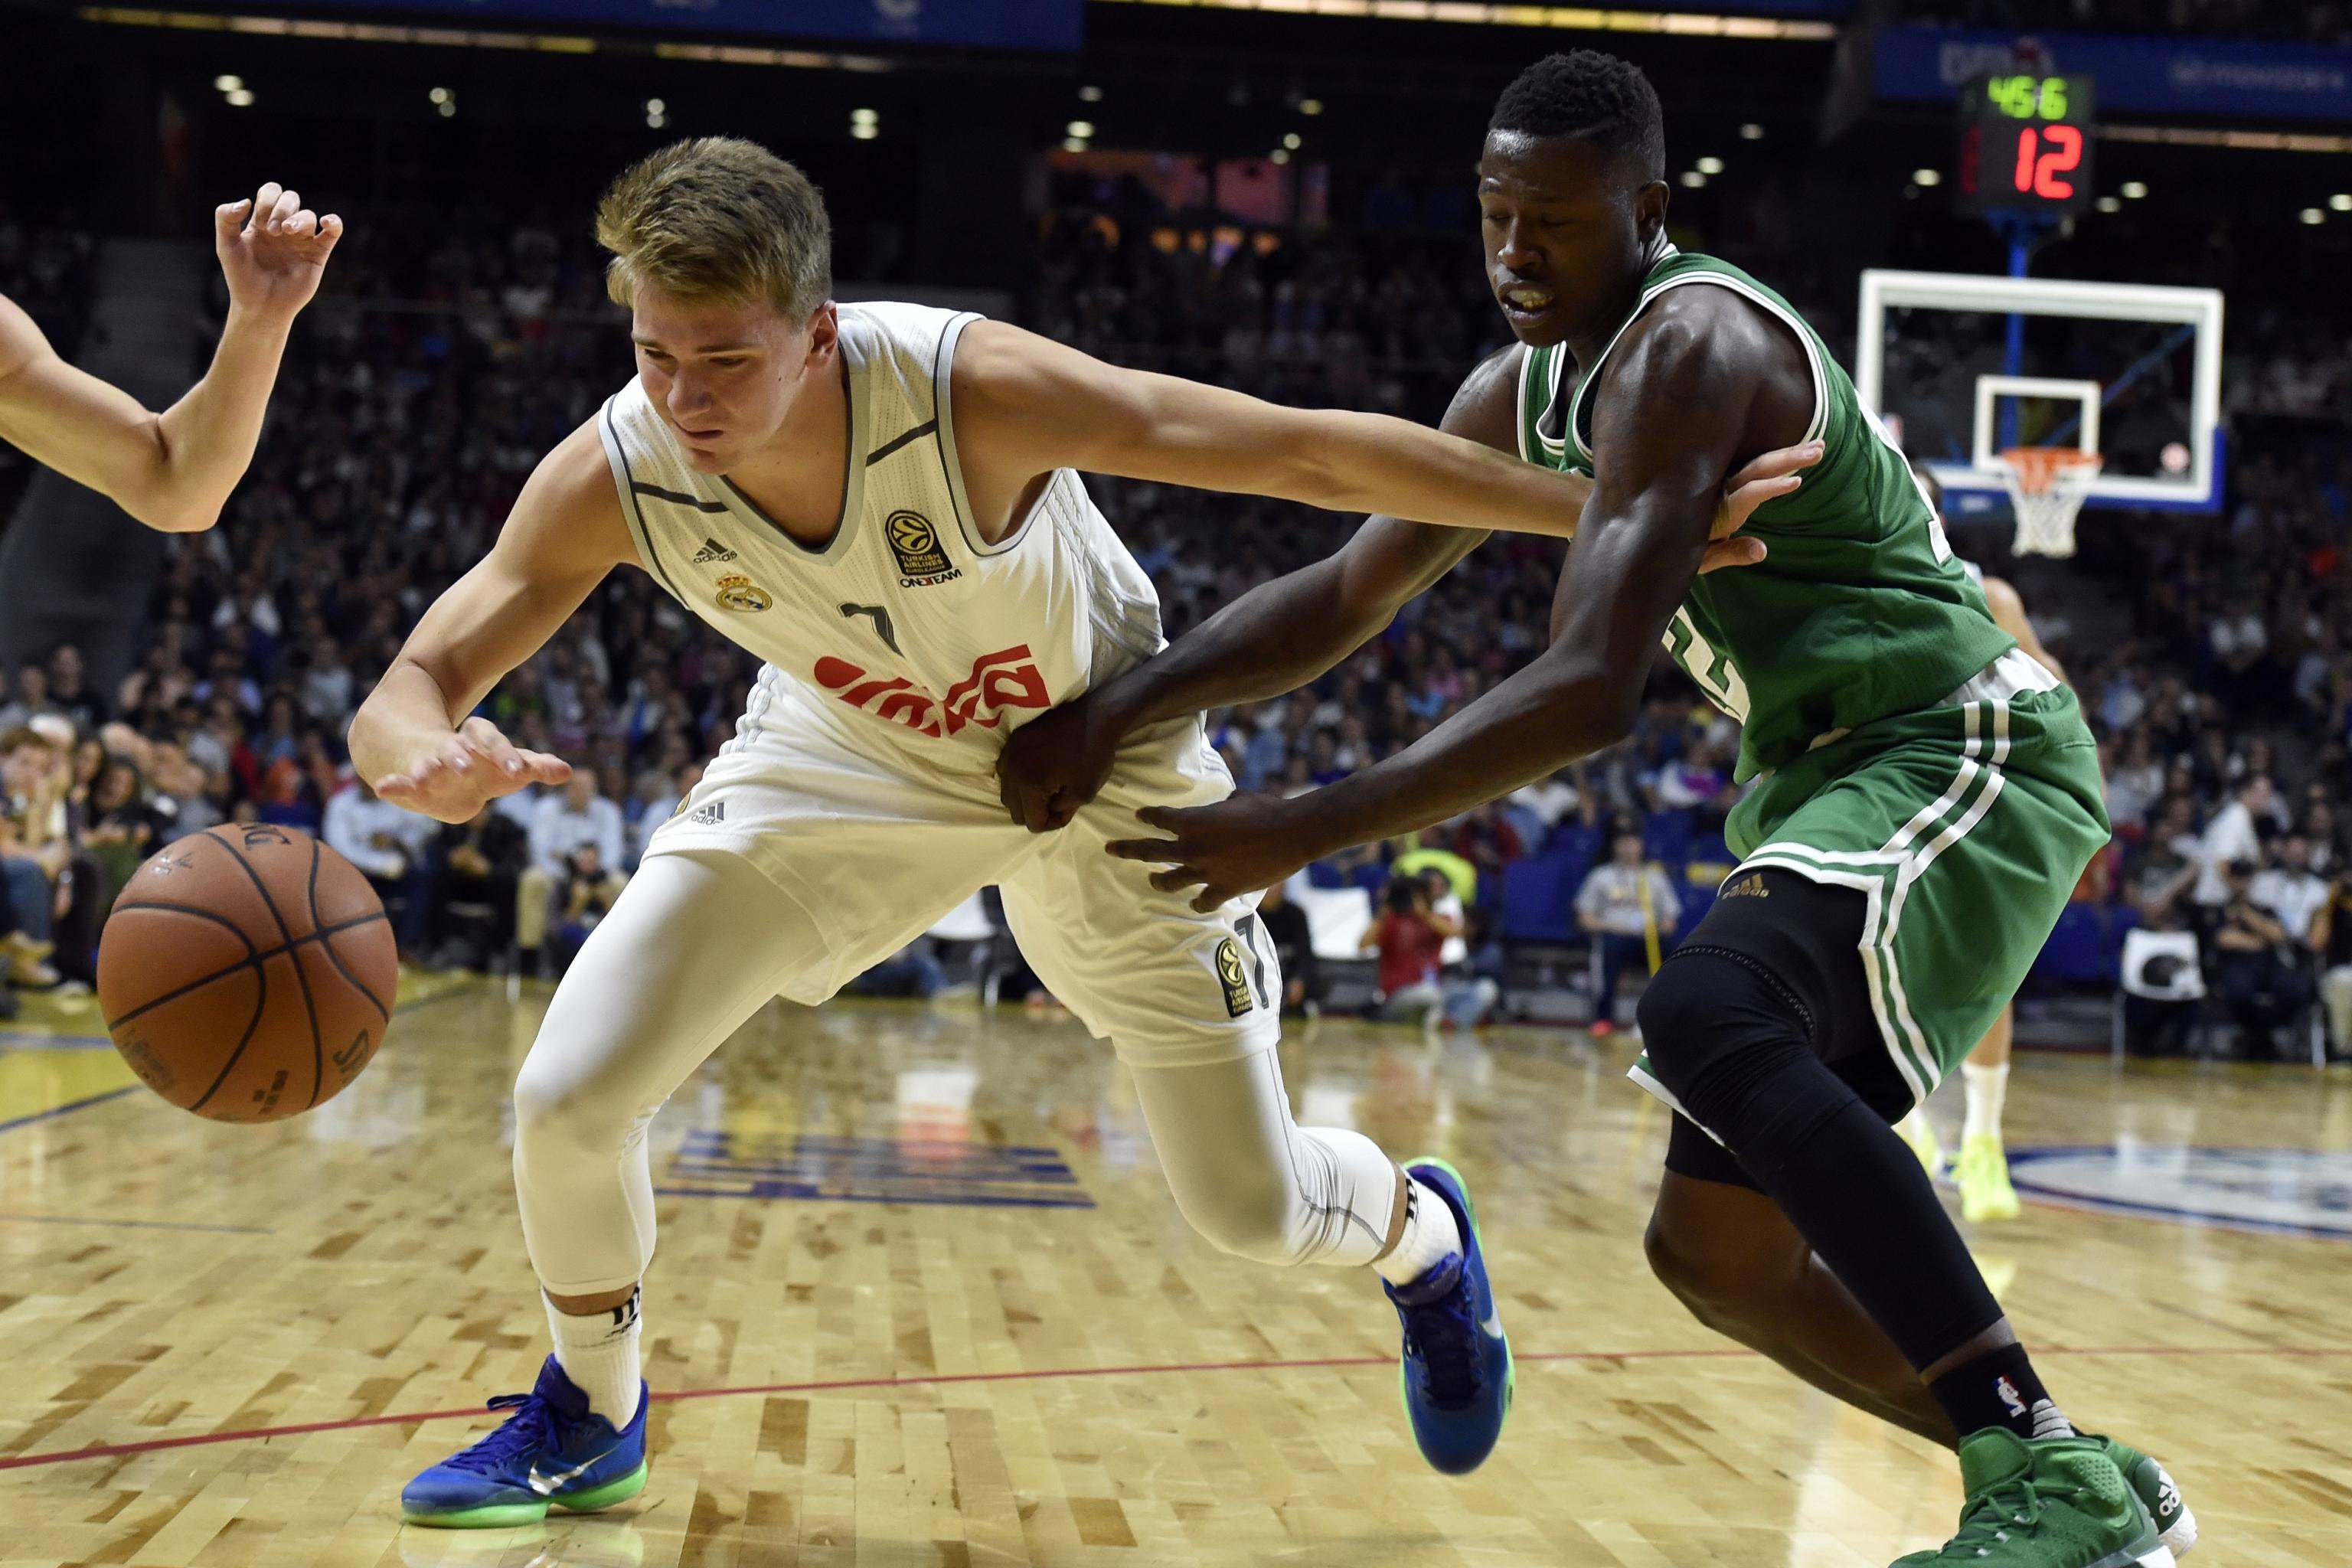 Luka Doncic's Profile: Age, weight, height, shoe size and jersey number